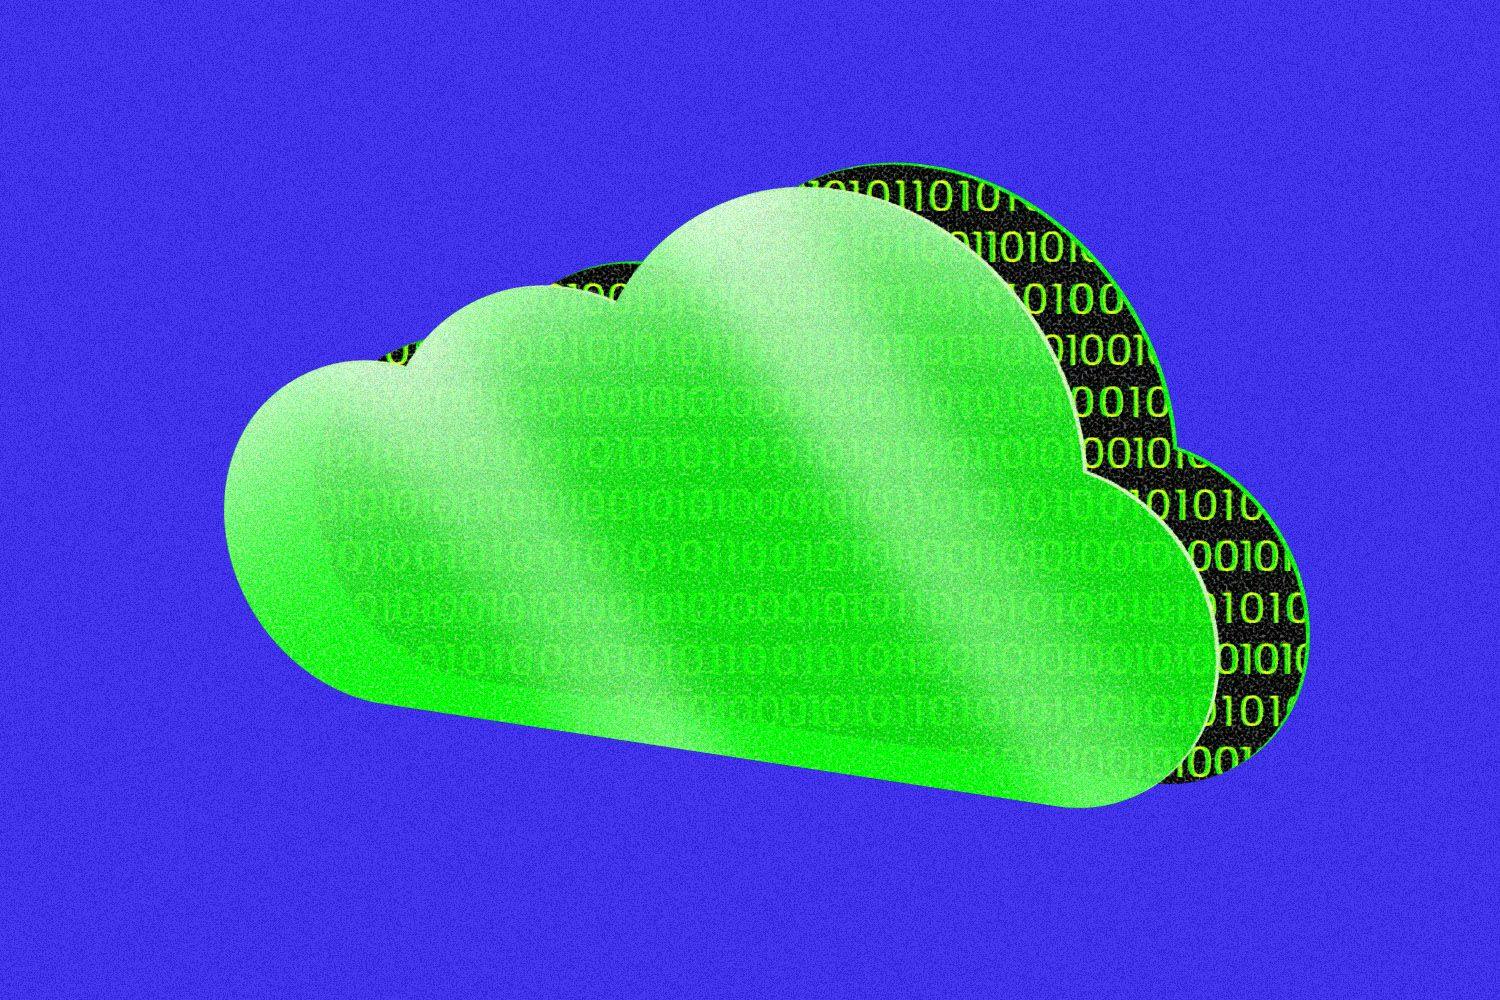 Green transparent cloud silhouette with binary code displayed behind